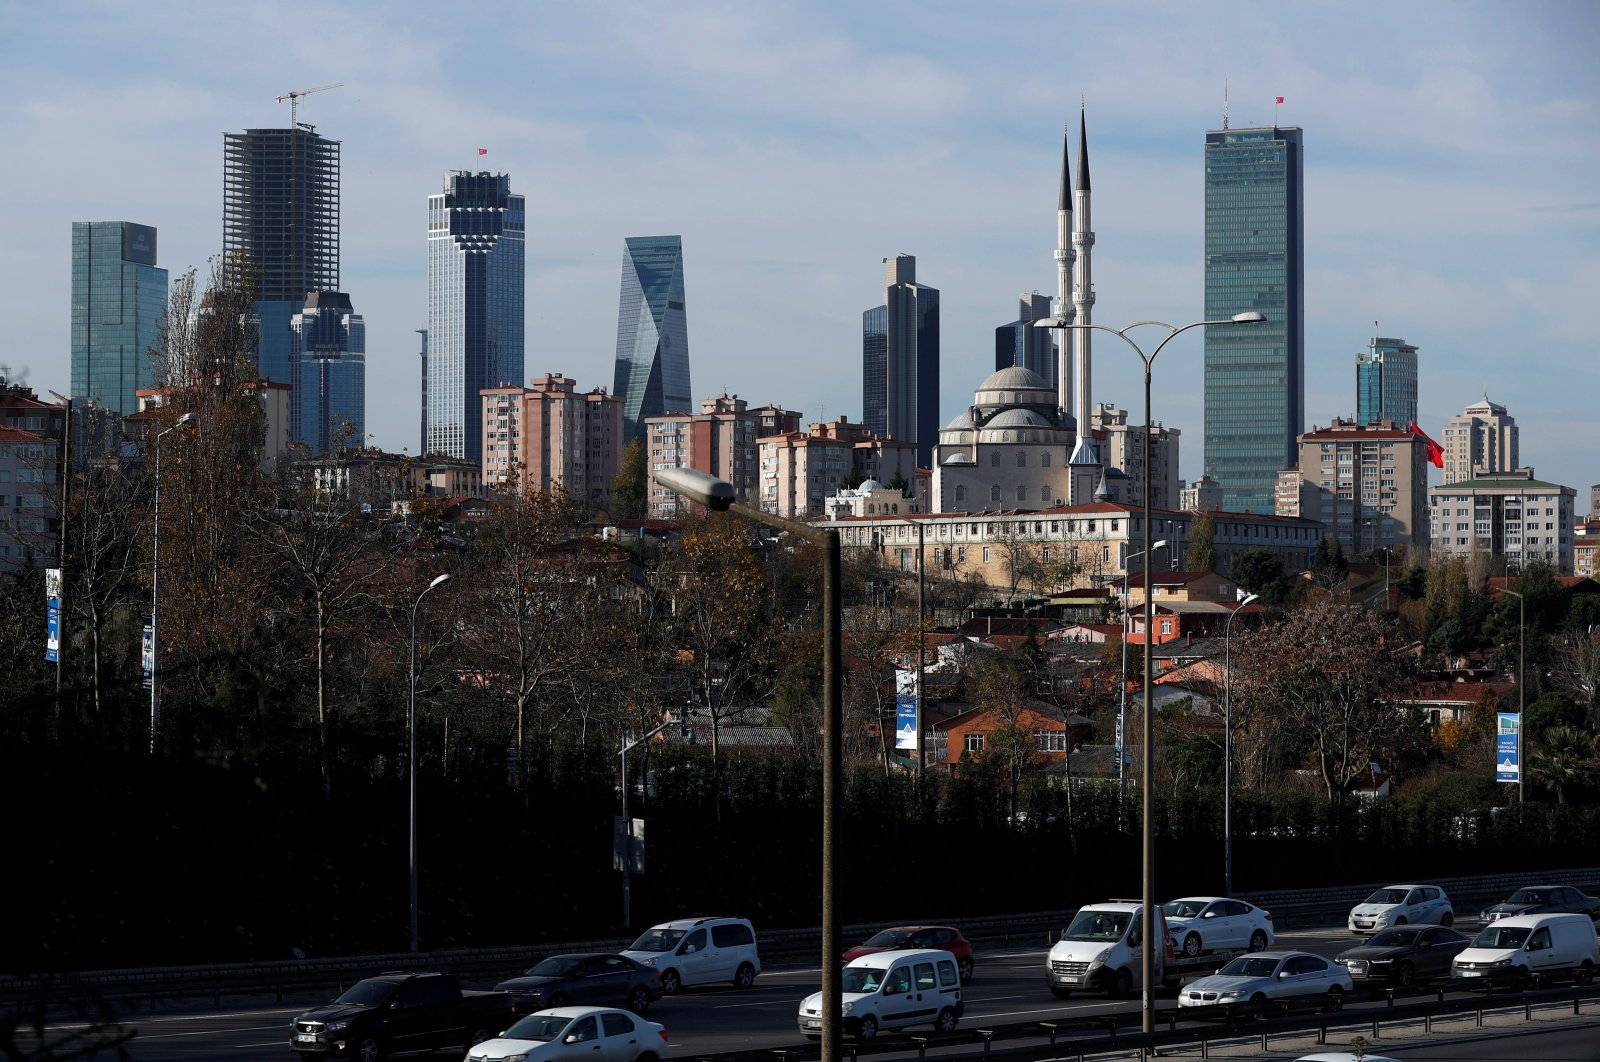 The business and financial district of Levent, where many of the leading Turkish banks&#039; and companies&#039; headquarters are located, is seen behind a residential neighborhood in Istanbul, Turkey, Nov. 30, 2017. (Reuters Photo)